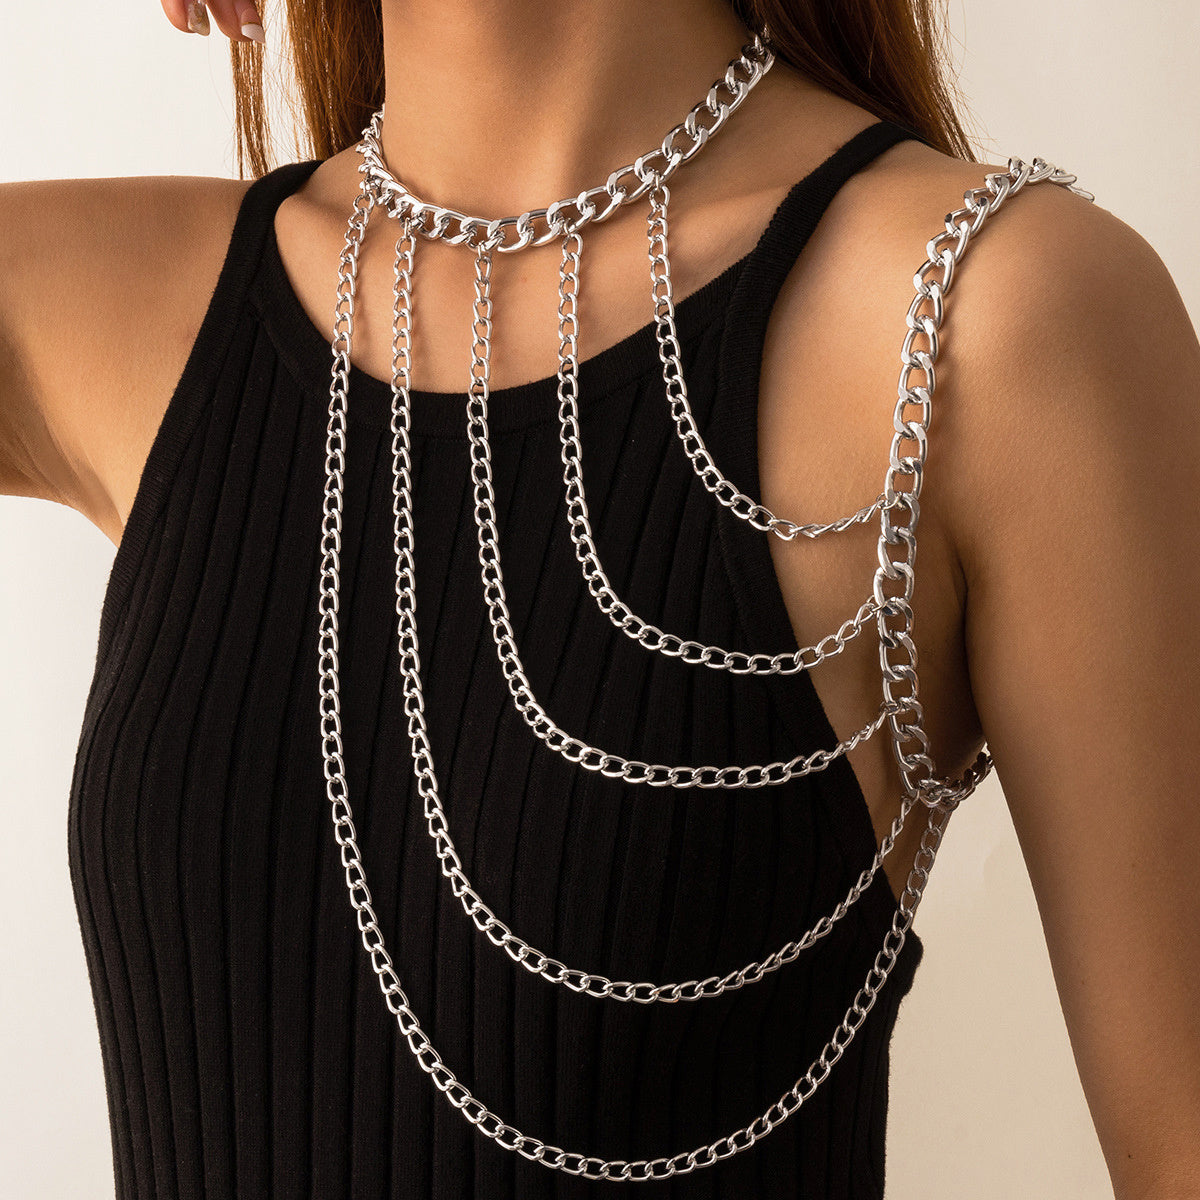 Punk-ify Your Look with This Stylish Multi-Layer Body Chain!